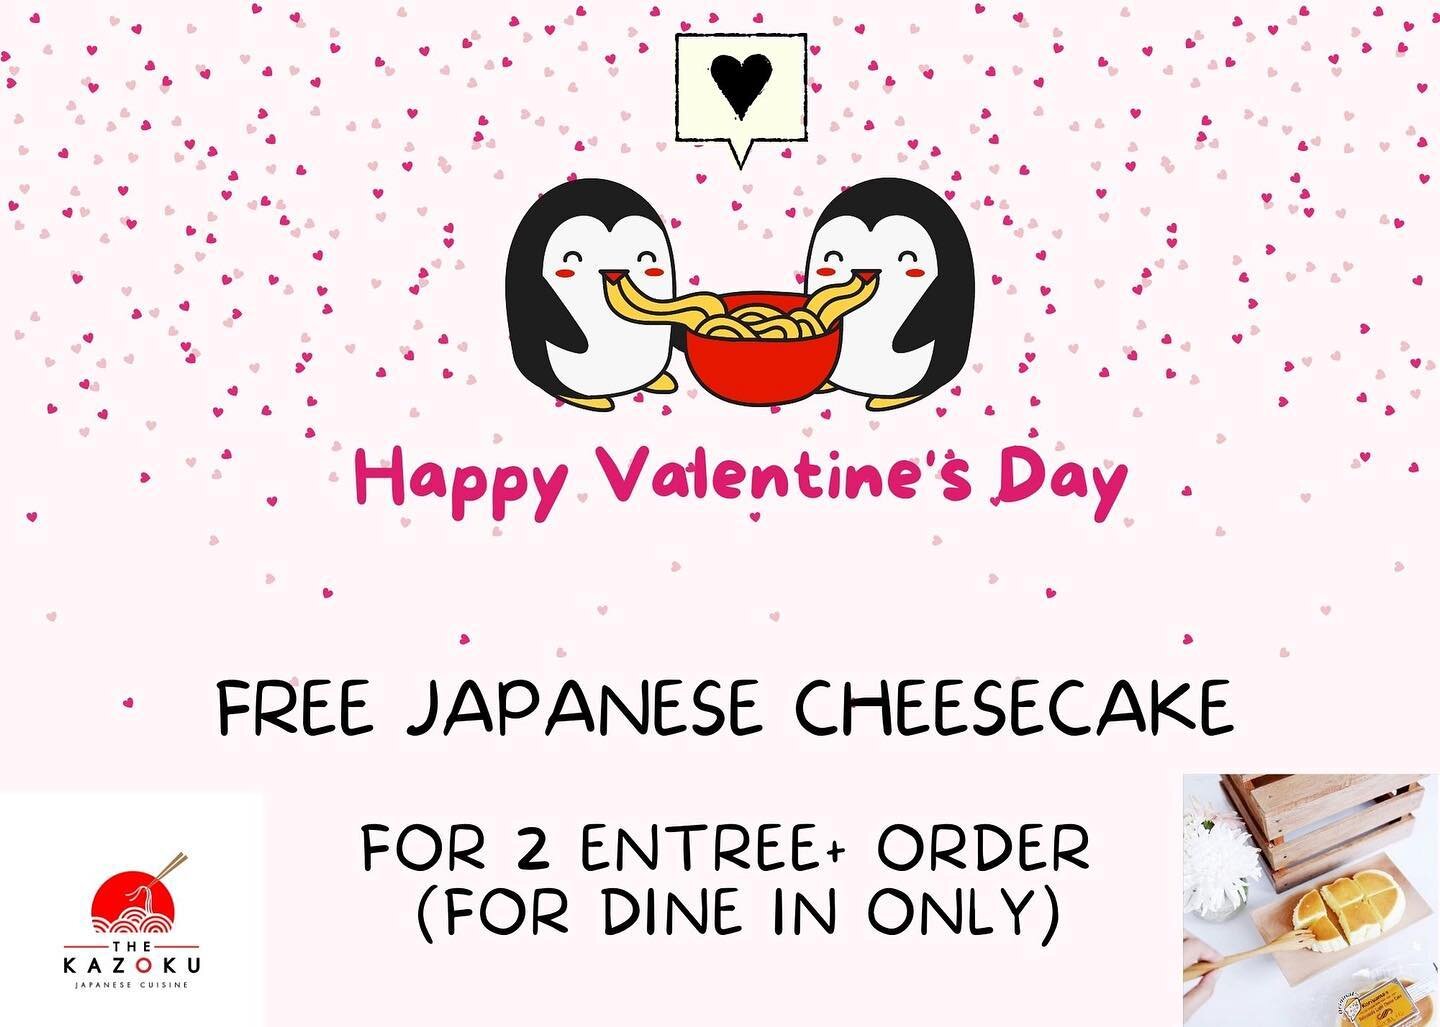 WE ARE OPEN ON VALENTINE&rsquo;S DAY❤️

Dear Value customers, we will be open on Tuesday February 14 (TOMORROW)
Our hours are 5pm-8:30pm
🍜
When you order 2 entrees, you will get Free Japanese cheesecake (for dine in only)
.
See you 💗